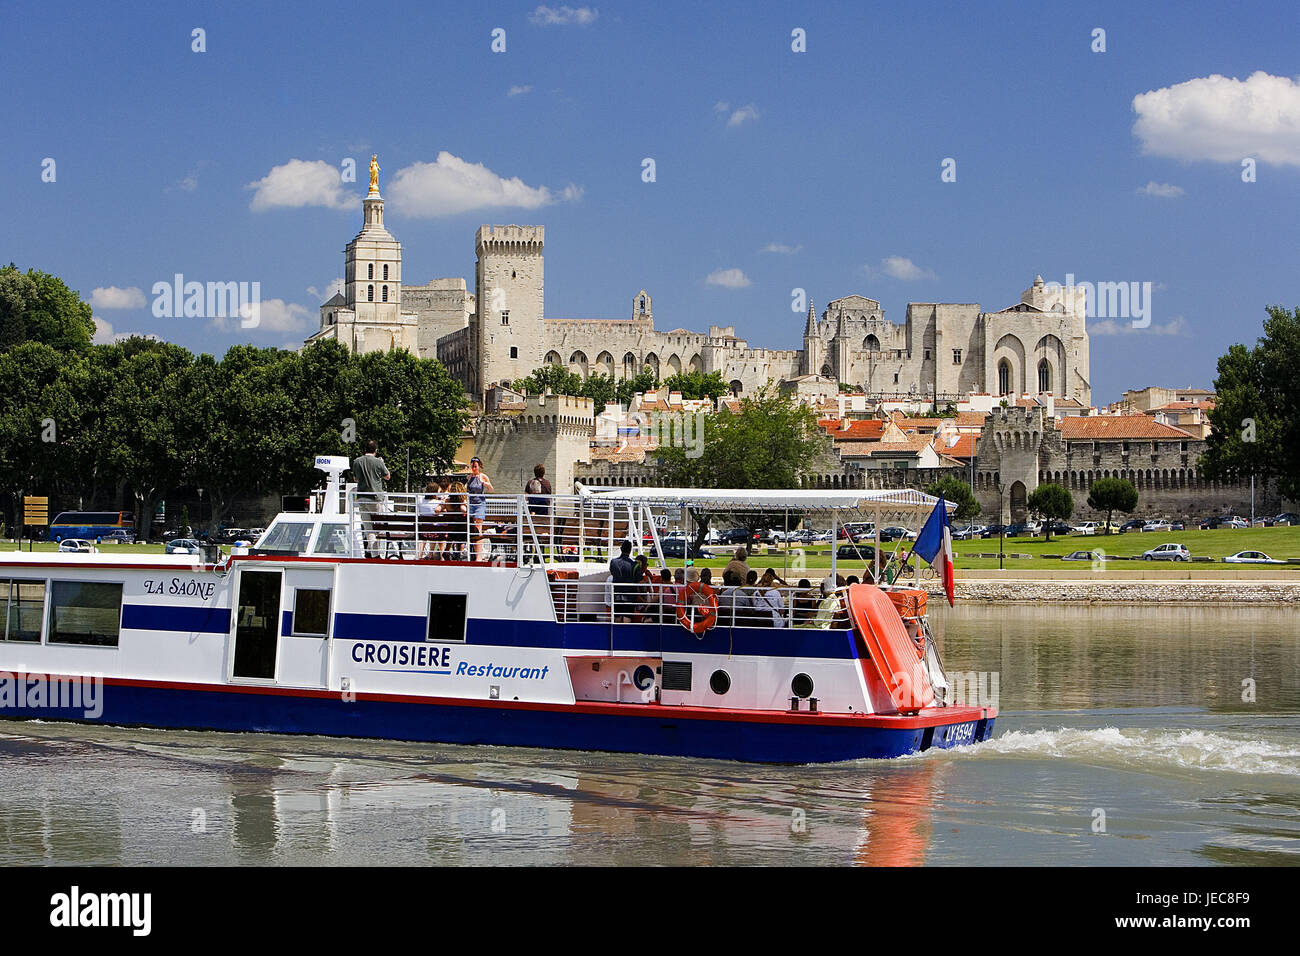 France, Provence, Avignon, town view, pope's palace, river, holiday ship, town, palace, doubles palace, structure, architecture, culture, place of interest, destination, tourism, UNESCO-world cultural heritage, the Rhone, ship, tourist, person, boat trip, boot tour, riverboat journey, summer, sightseeing, Stock Photo